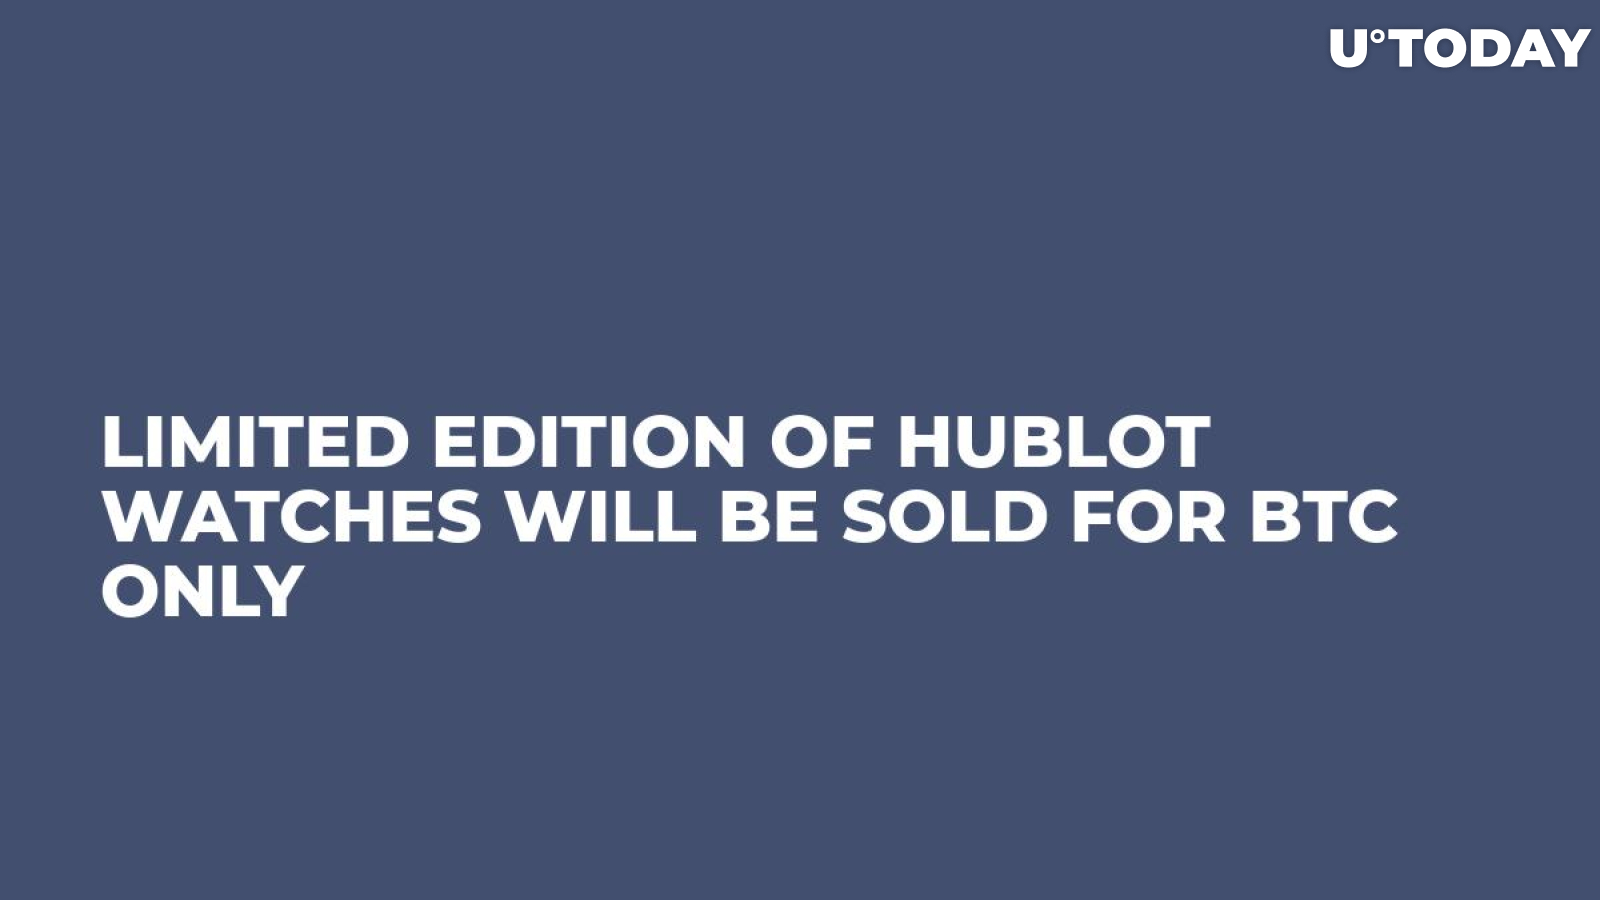 Limited Edition of Hublot Watches Will Be Sold for BTC Only